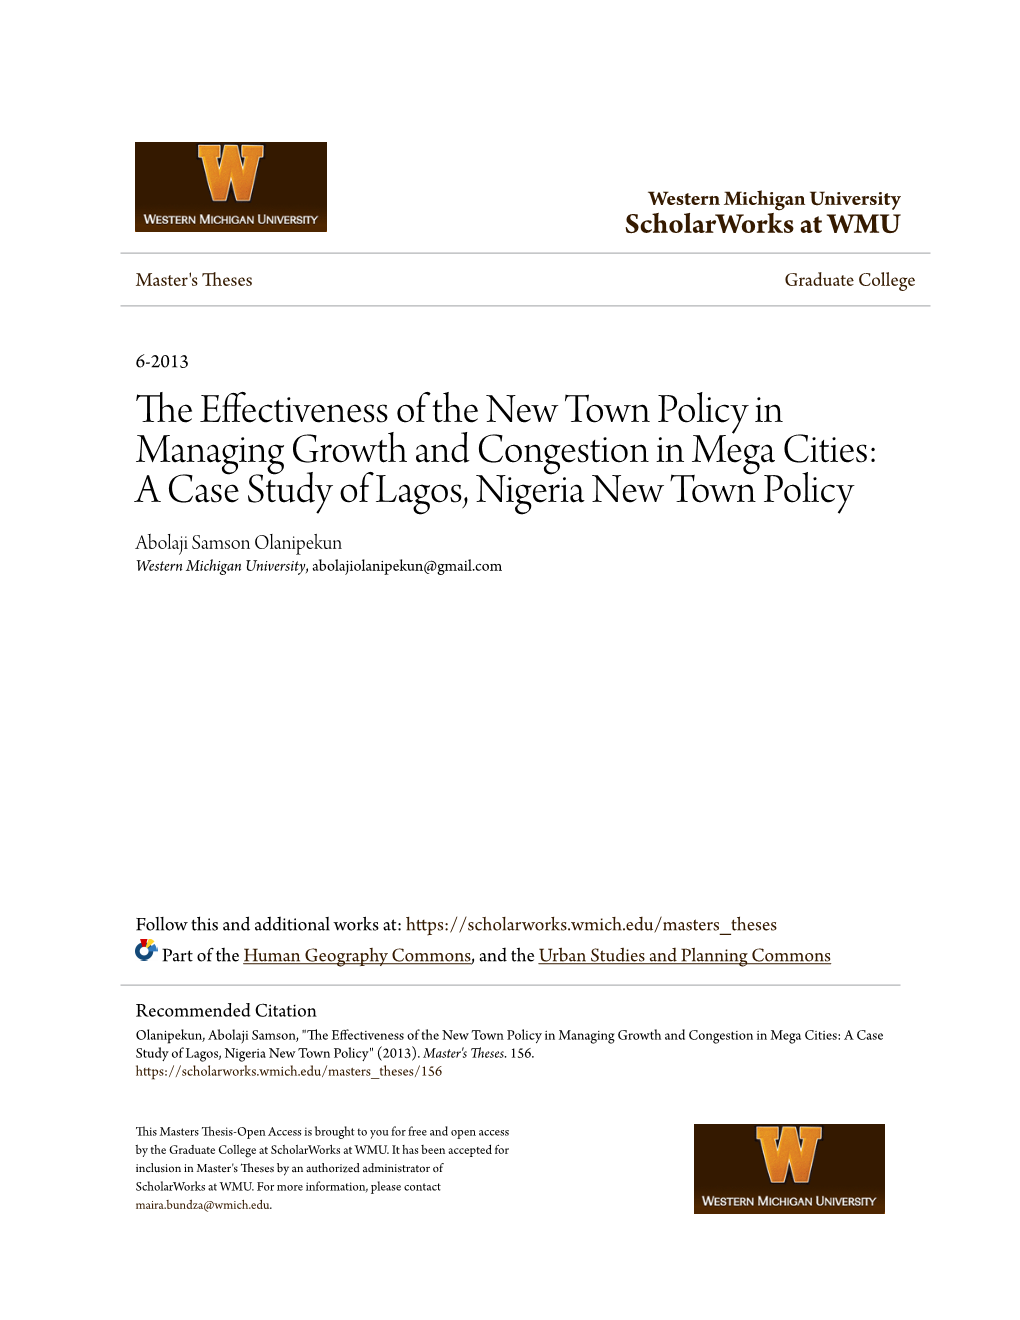 The Effectiveness of the New Town Policy in Managing Growth and Congestion in Mega Cities: a Case Study of Lagos, Nigeria New Town Policy" (2013)